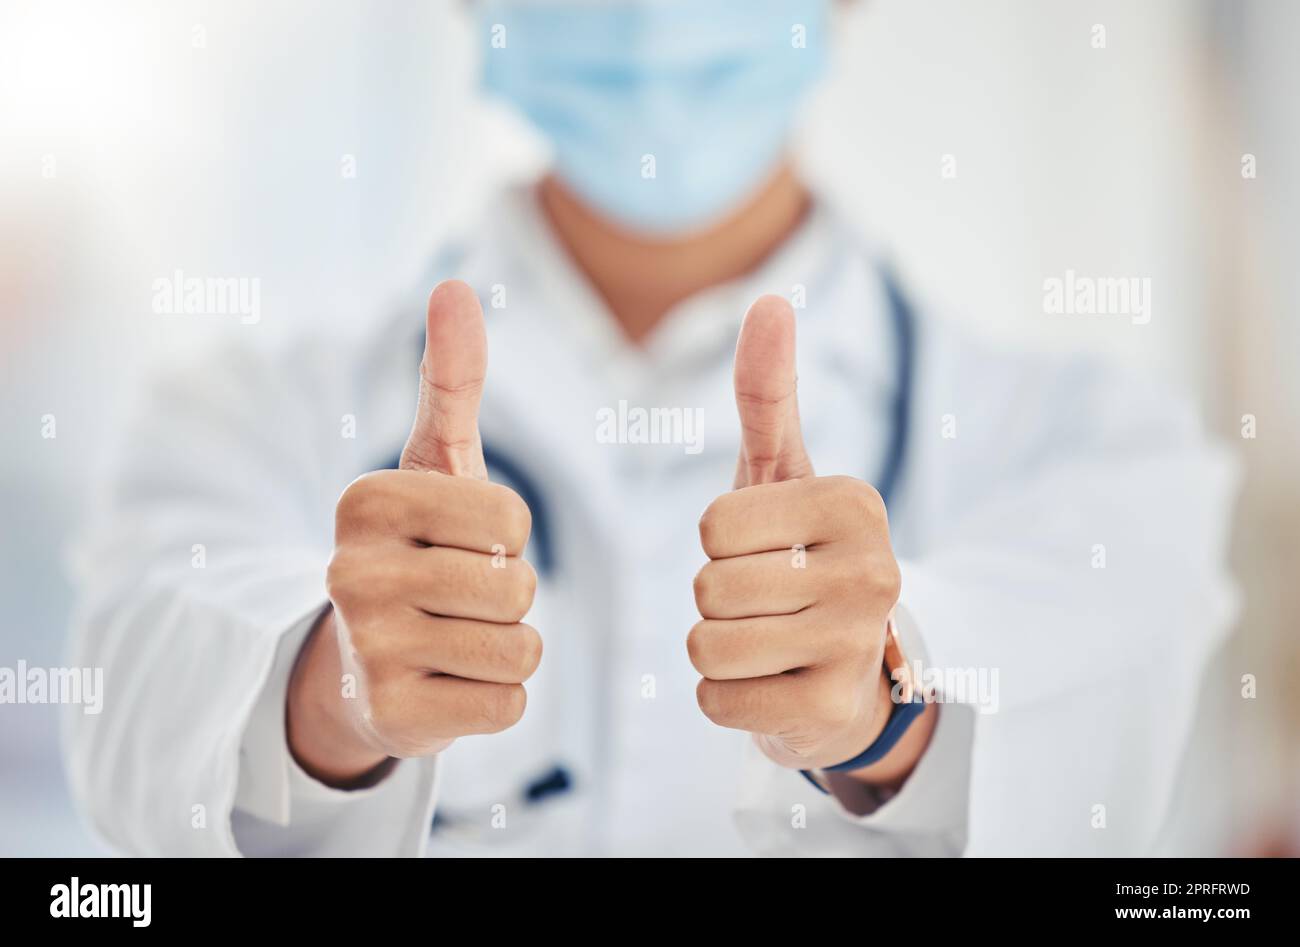 Thumbs up doctor hand sign for covid surgery success, support and yes in a hospital. Medical and healthcare worker showing thank you, agreement or goal completion hands gesture in a health clinic Stock Photo